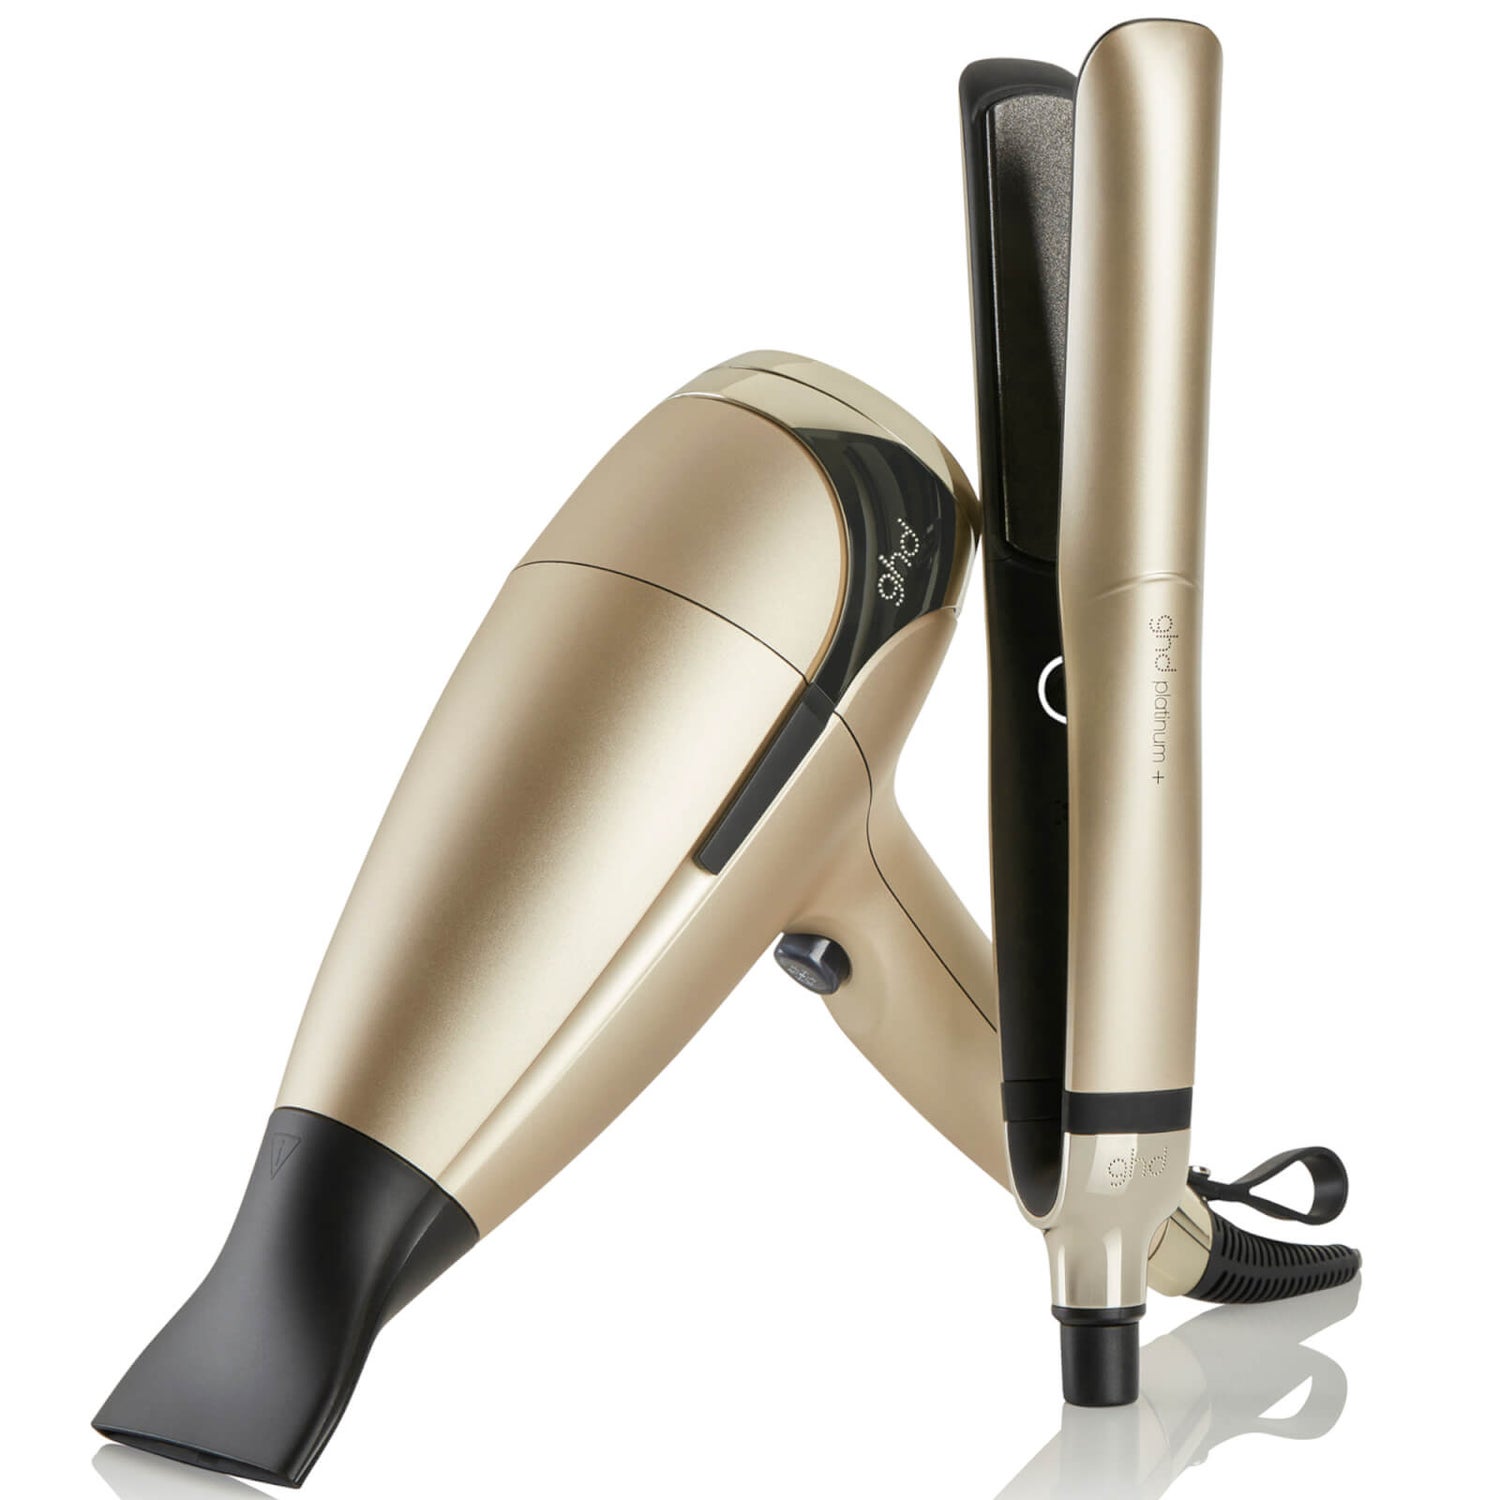 ghd Platinum+ and Helios Limited Edition Hair Straightener and Hair Dryer in Champagne Set